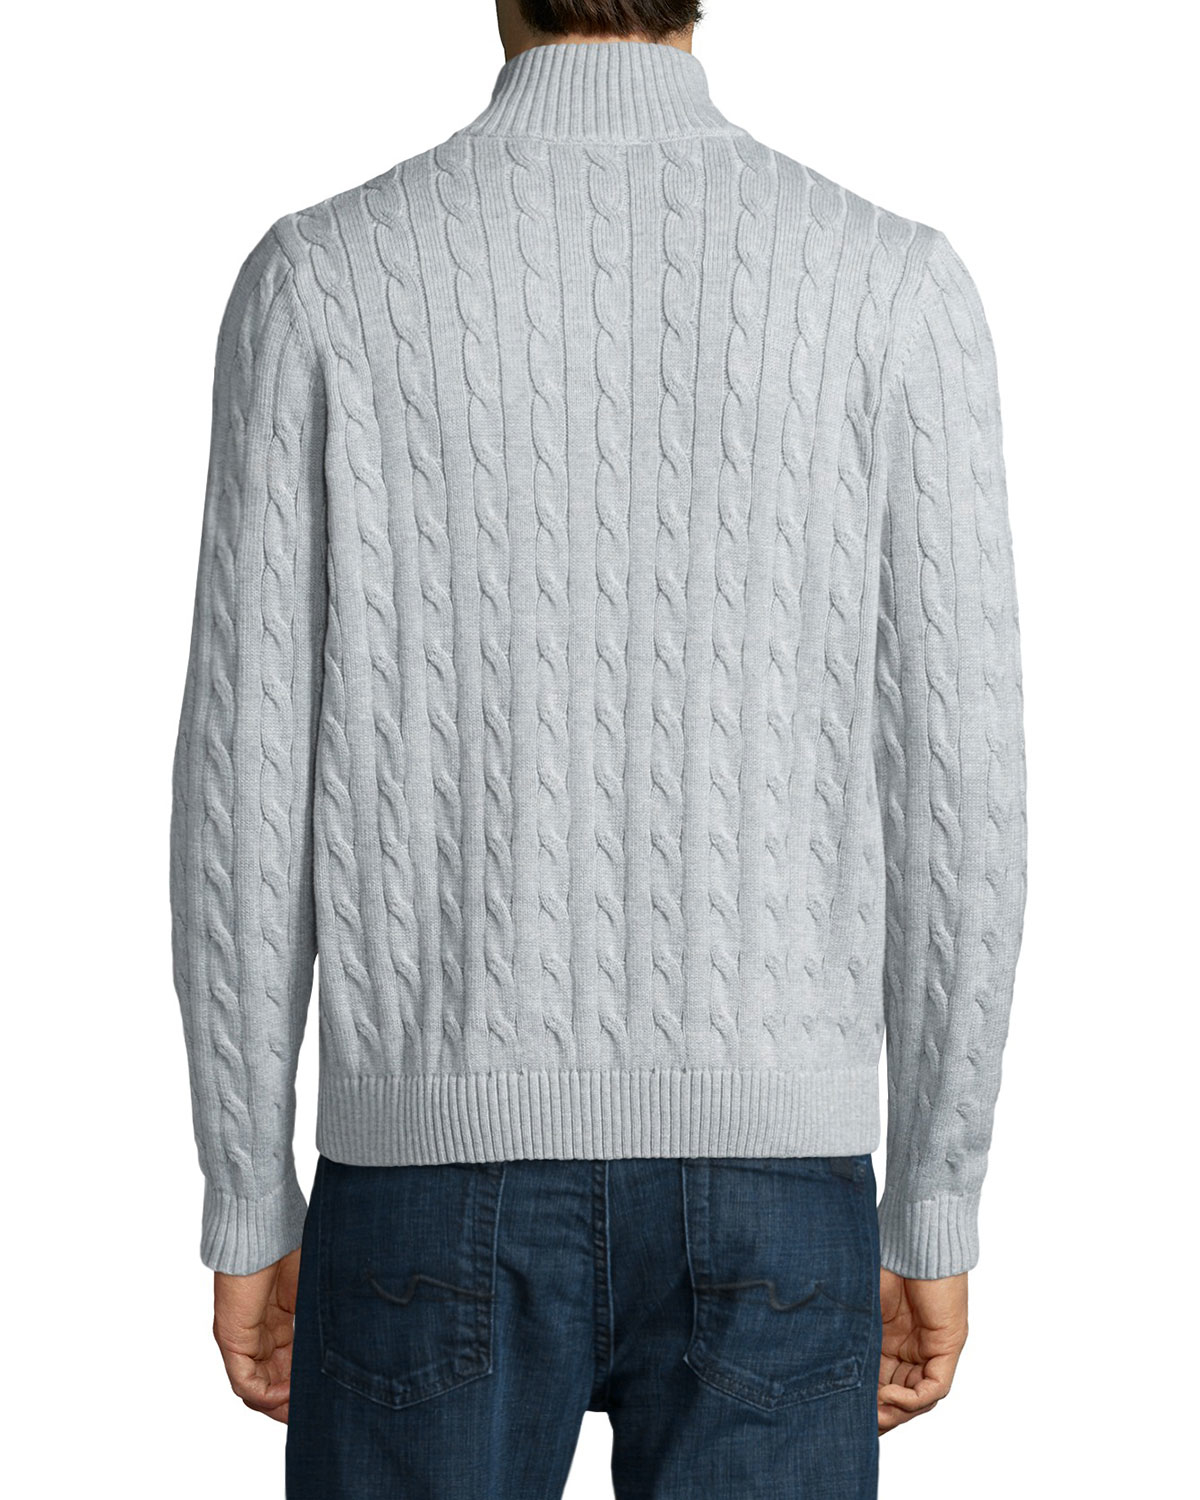 Lacoste Cable-knit Half-zip Knit Sweater in Gray for Men - Lyst